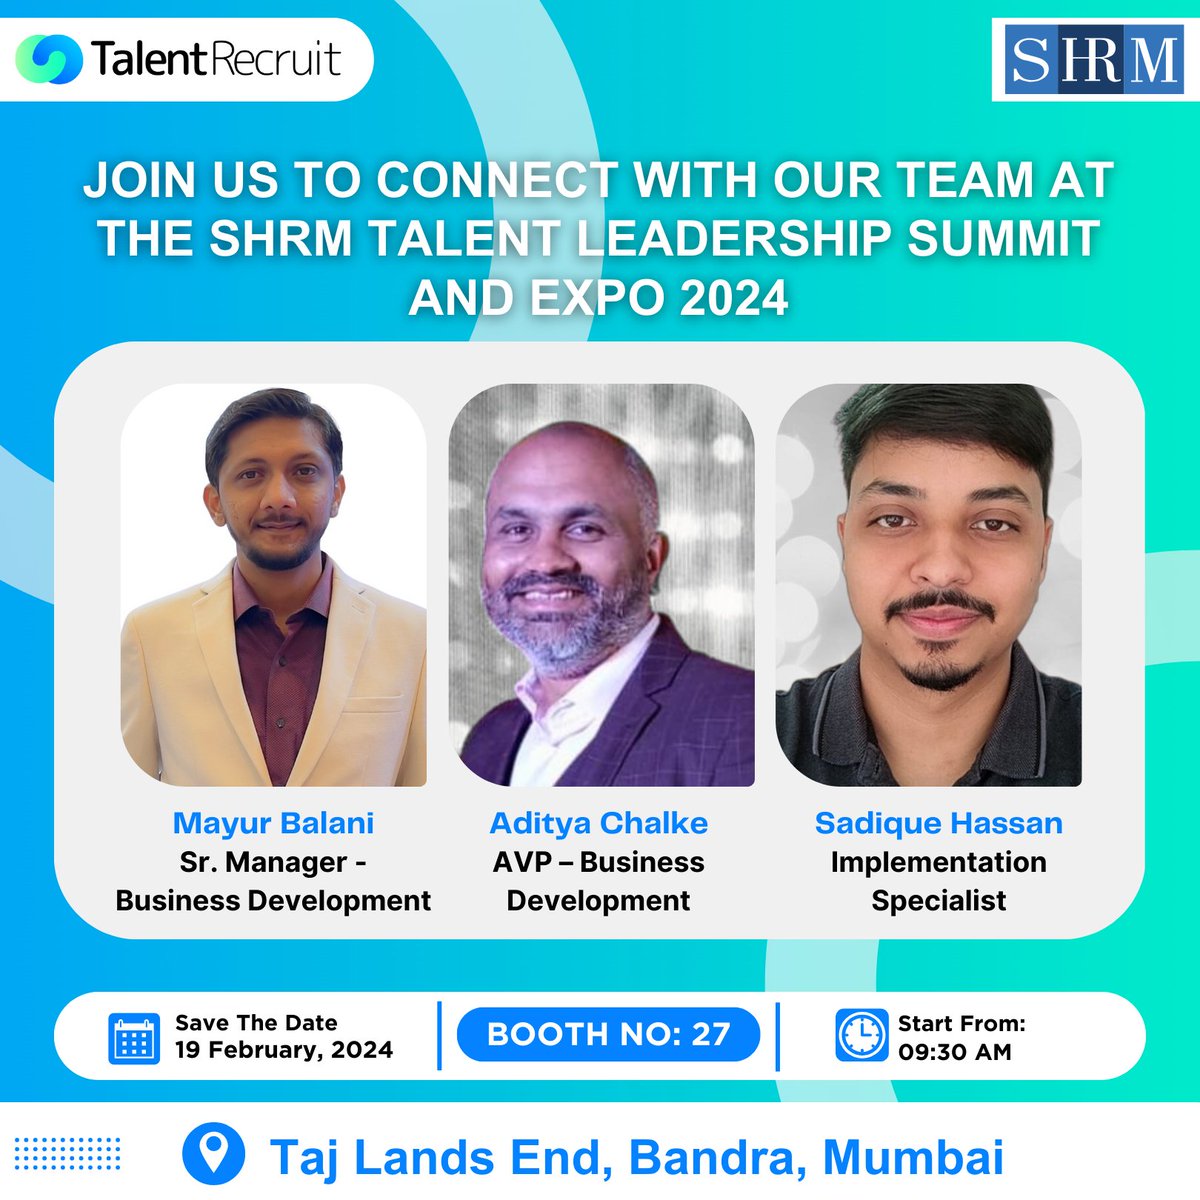 Talent Recruit excitedly joins The SHRM India Talent Leadership Summit & Expo 2024!

📅 Date: 19th Feb 2024 
📍 Location: Taj Lands End, Mumbai 
🎪 Booth No: 27

Join us to explore talent strategies & meet our team.

#shrmindiatalent #hr #TalentRecruit'